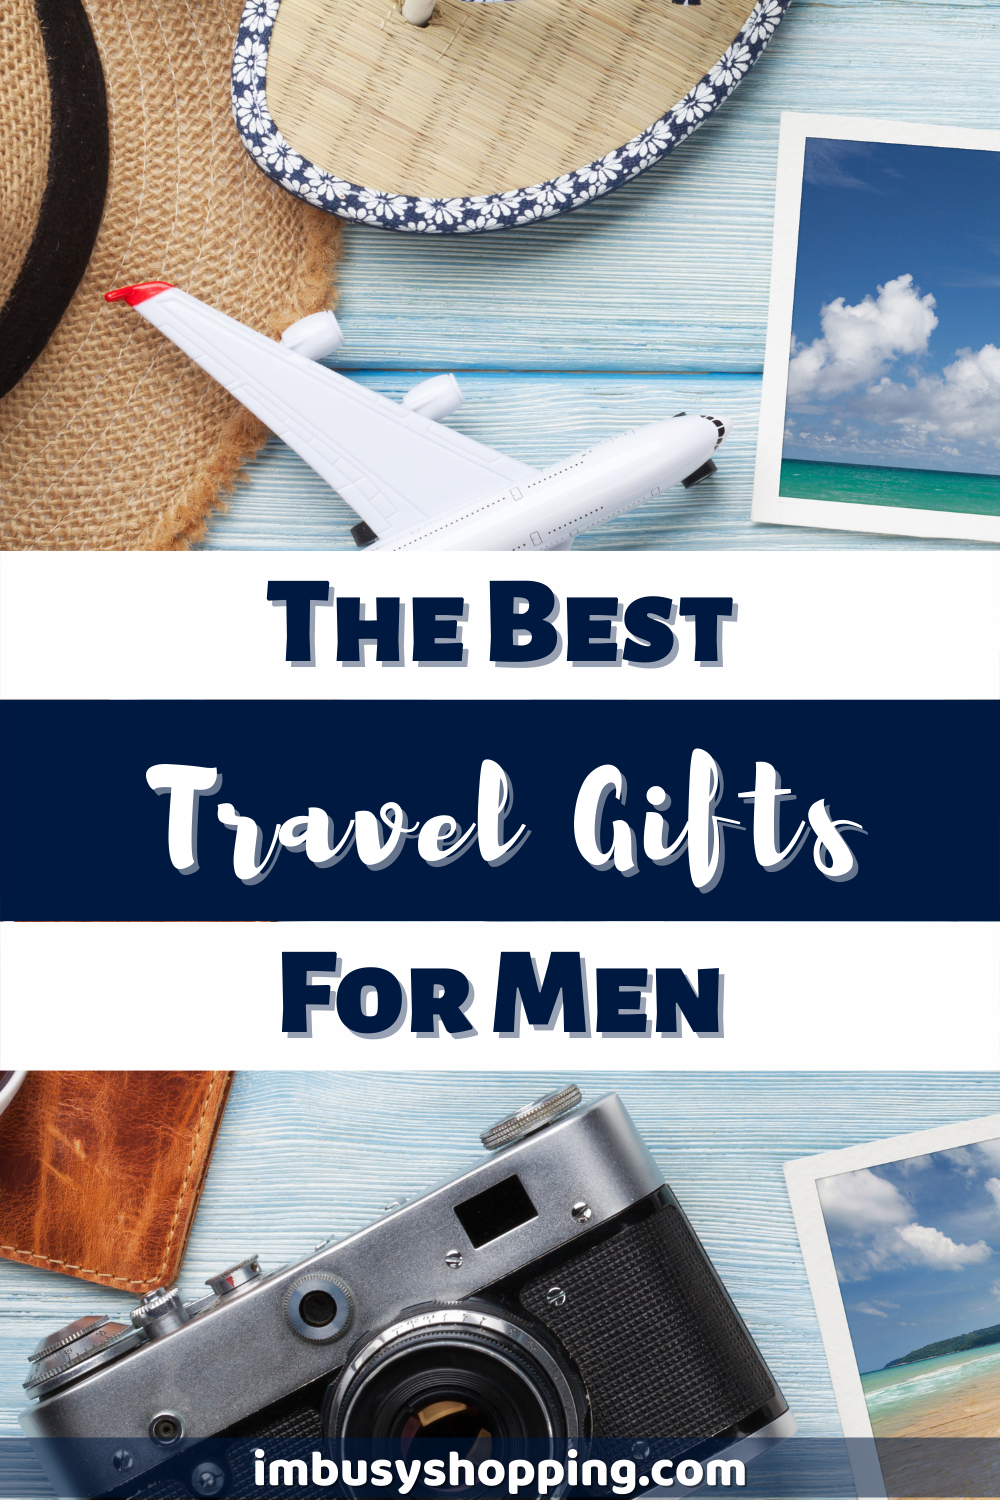 Pin showing the title The Best Travel Gifts for Men